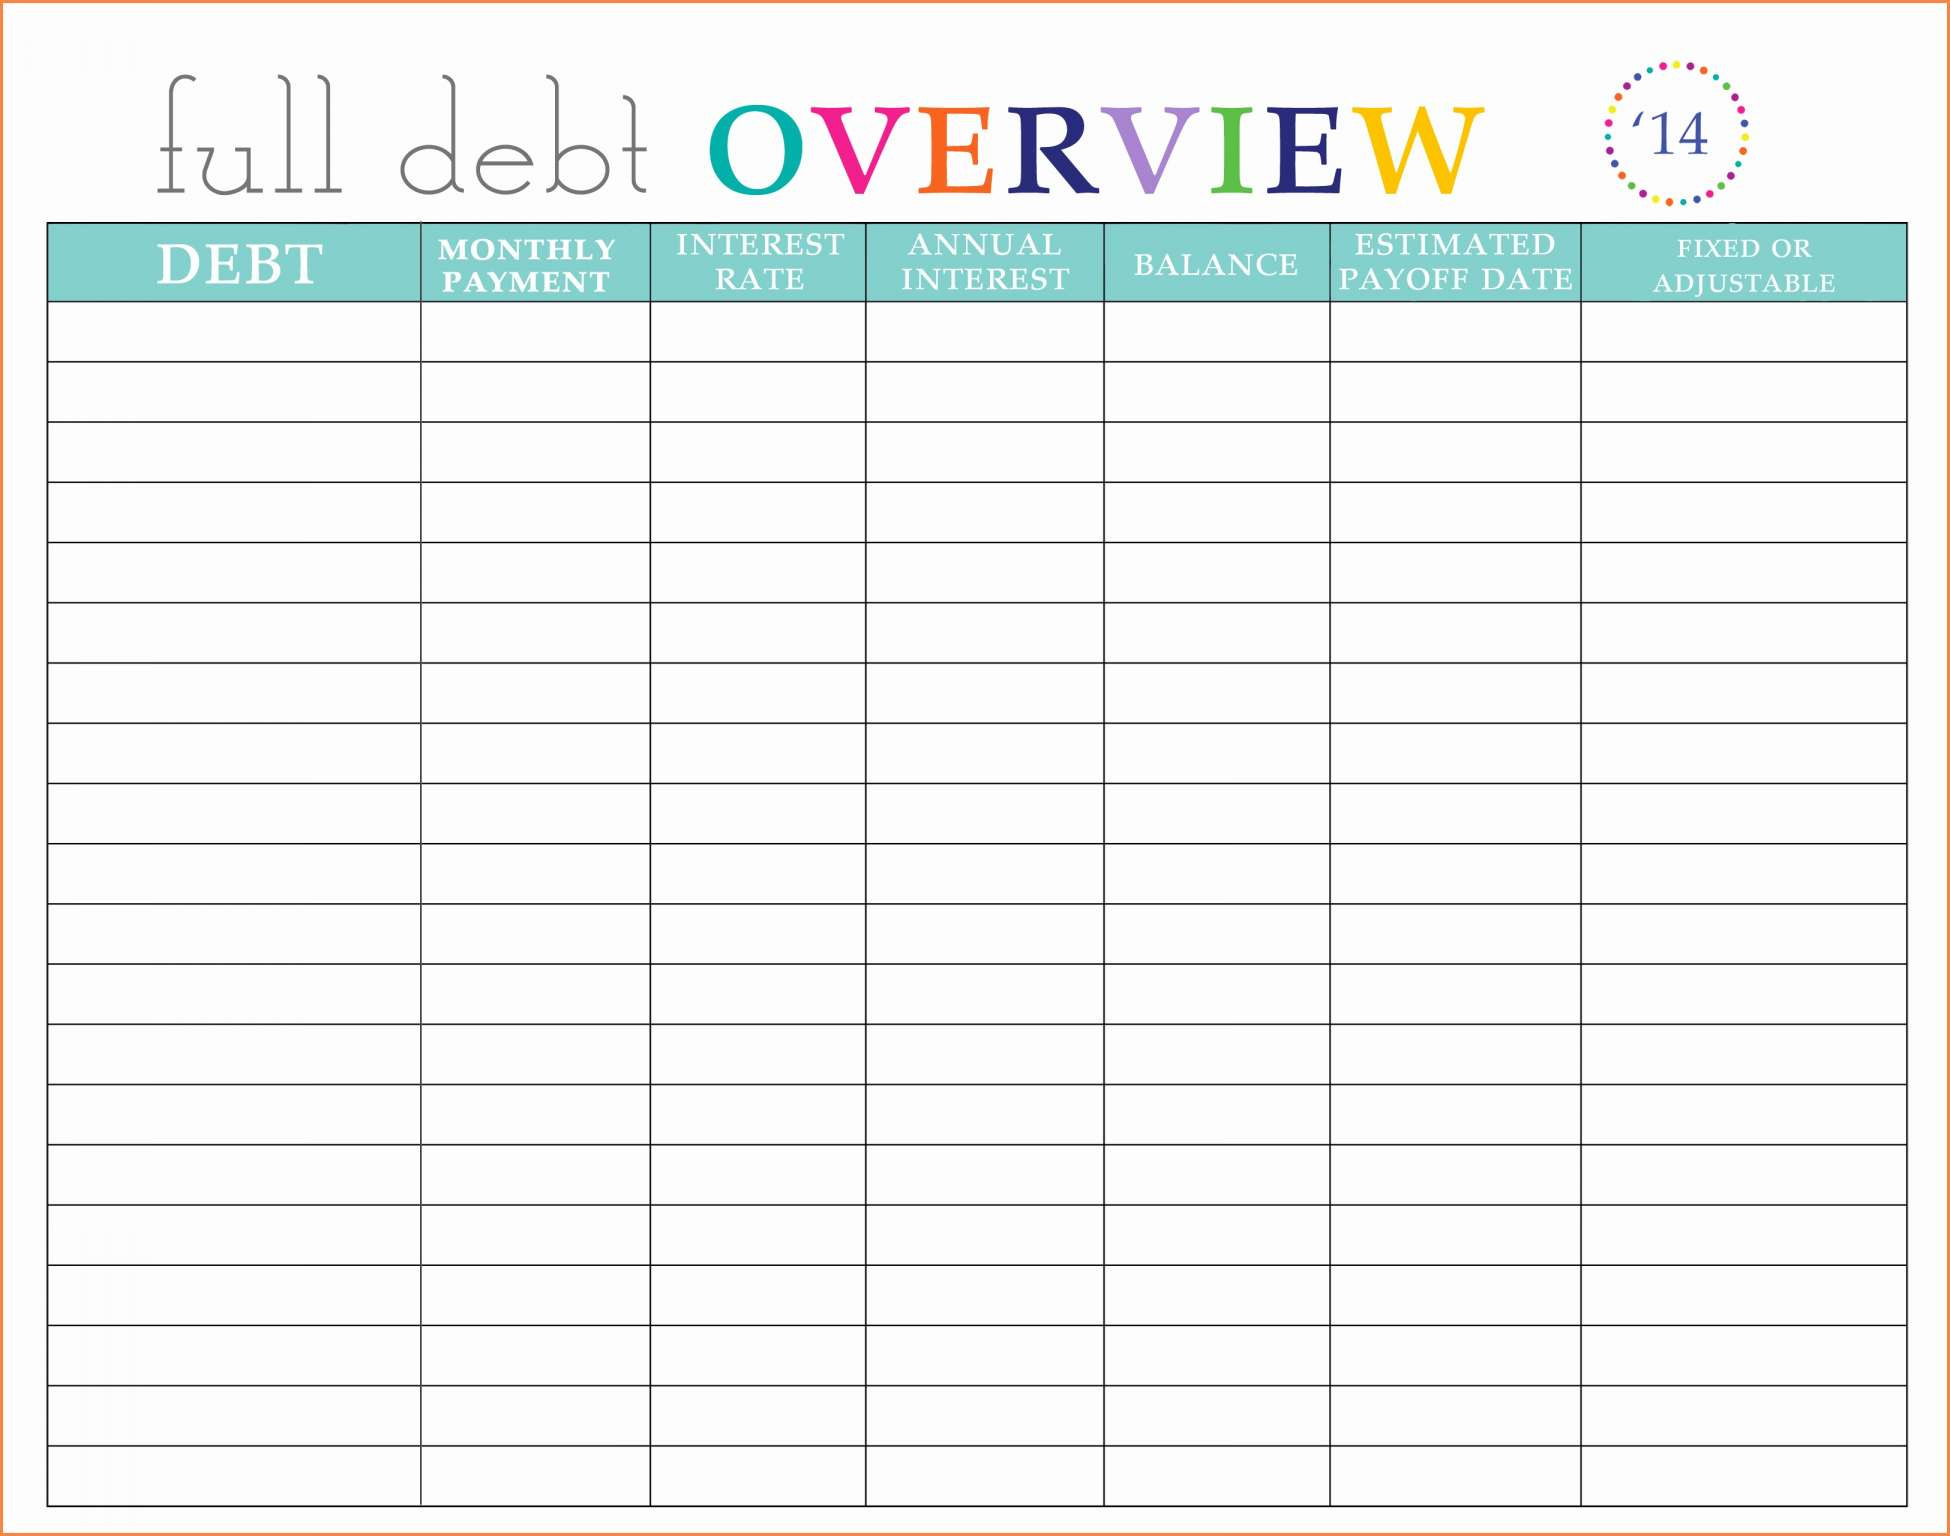 Budget And Debt Spreadsheet Intended For Budget And Debt Spreadsheet  My Spreadsheet Templates